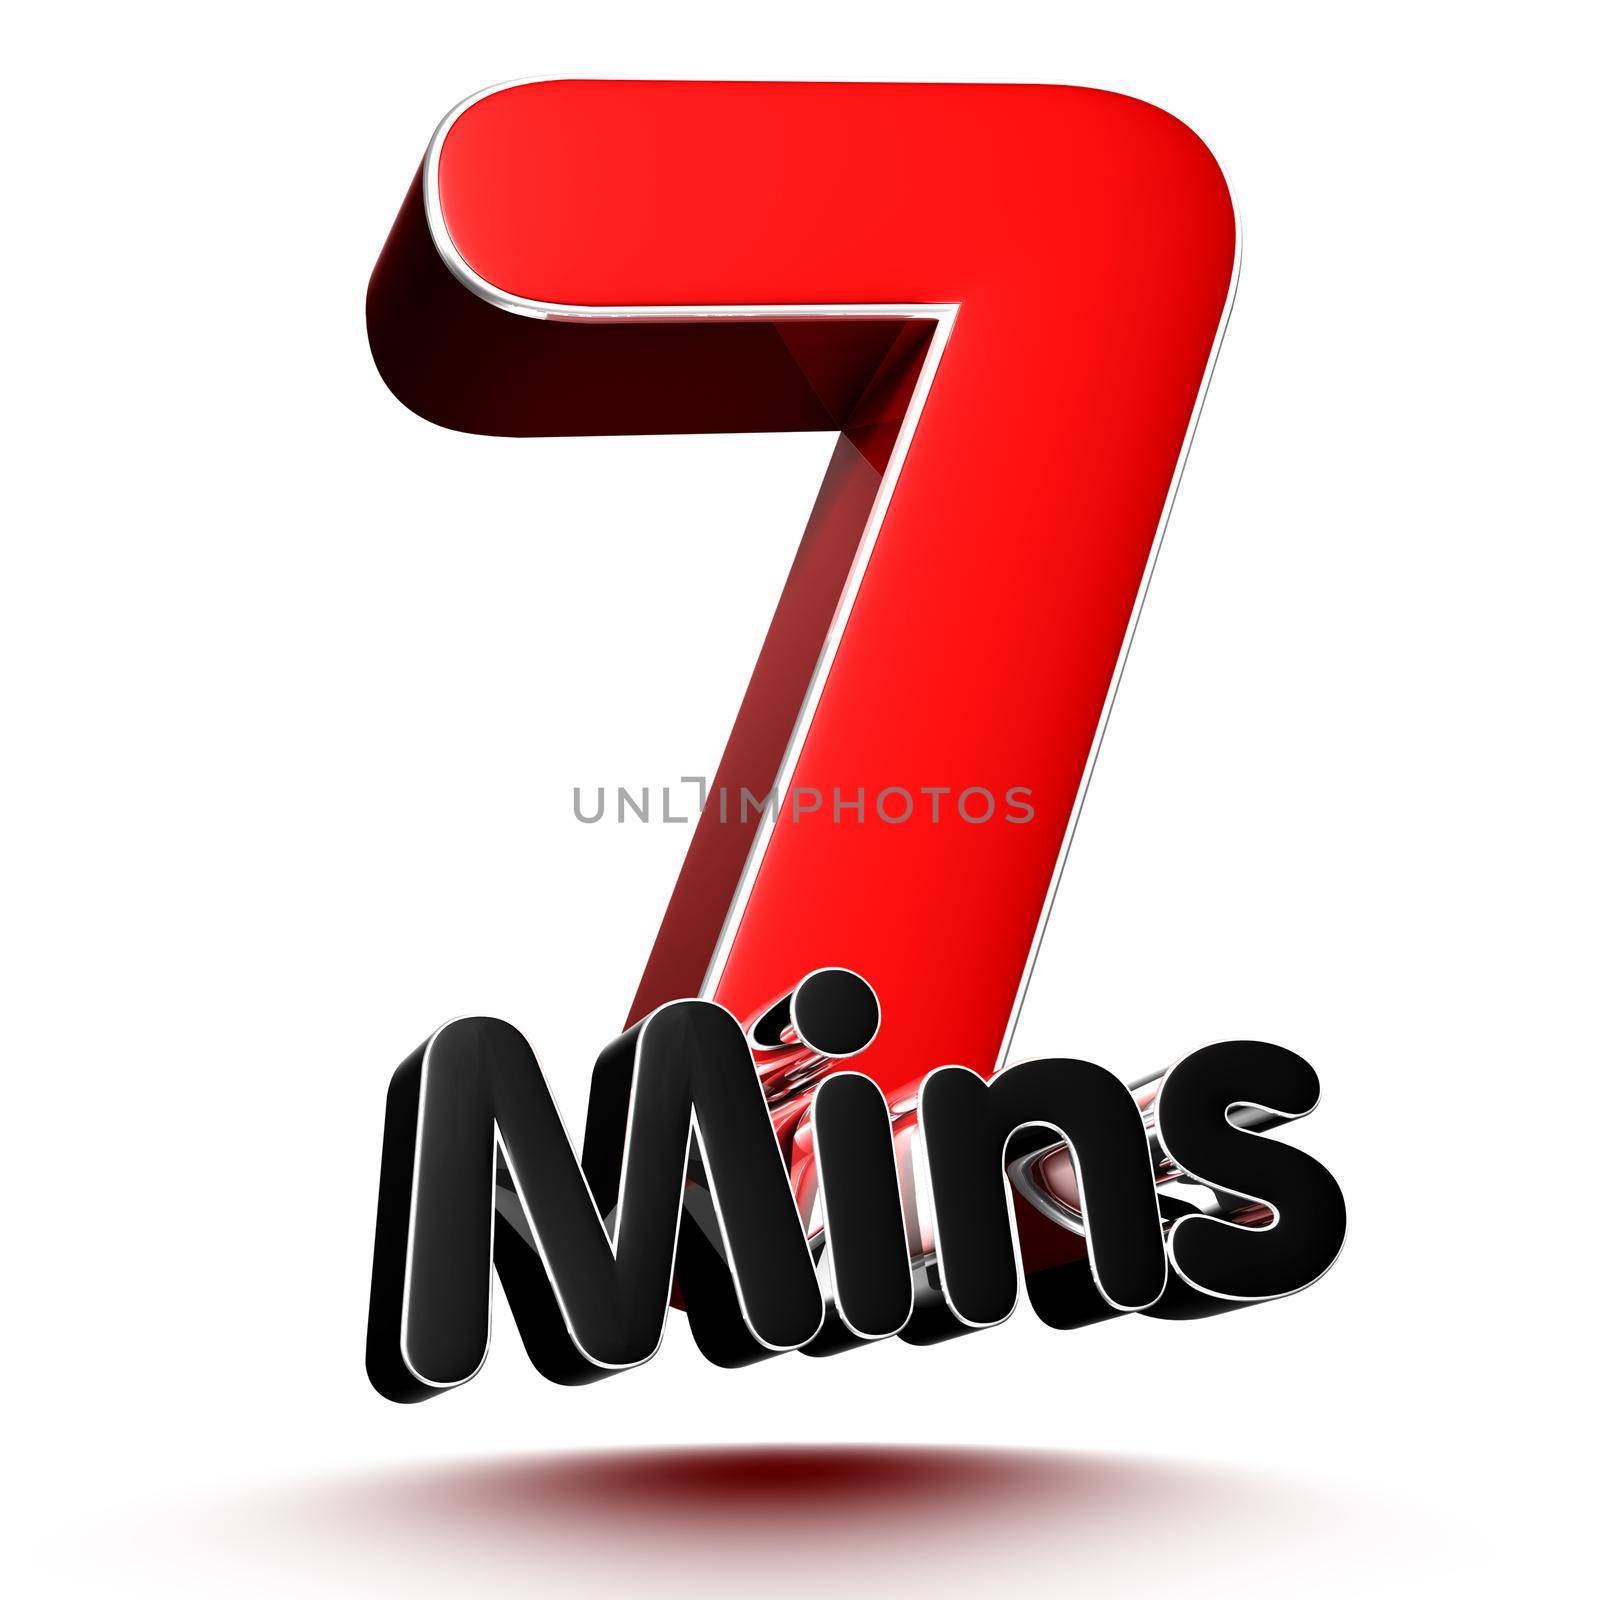 7 mins isolated on white background illustration 3D rendering with clipping path.